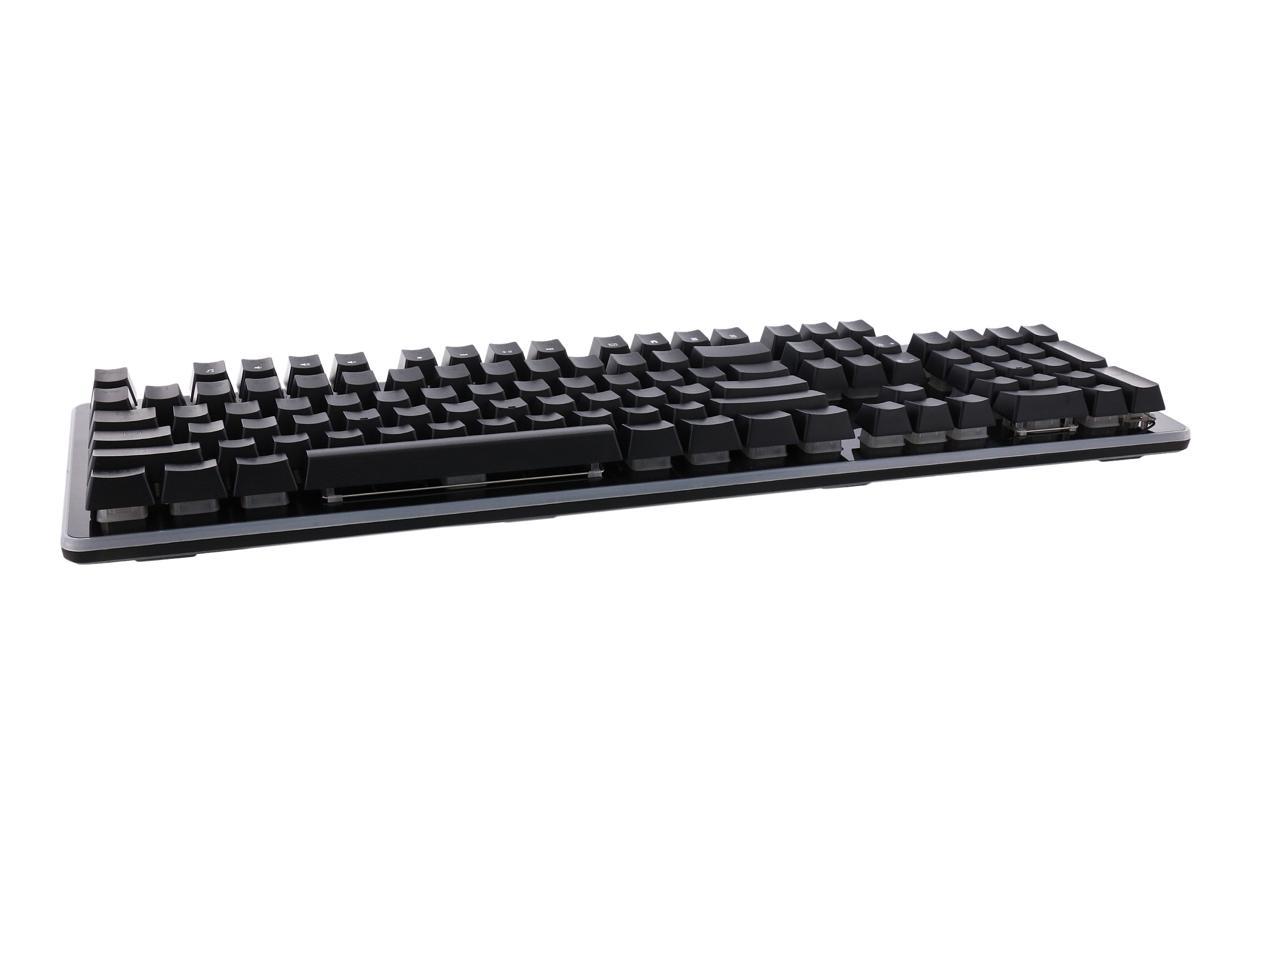 USB Wired Gaming Keyboard Official LFC Product Liverpool FC Keyboard 